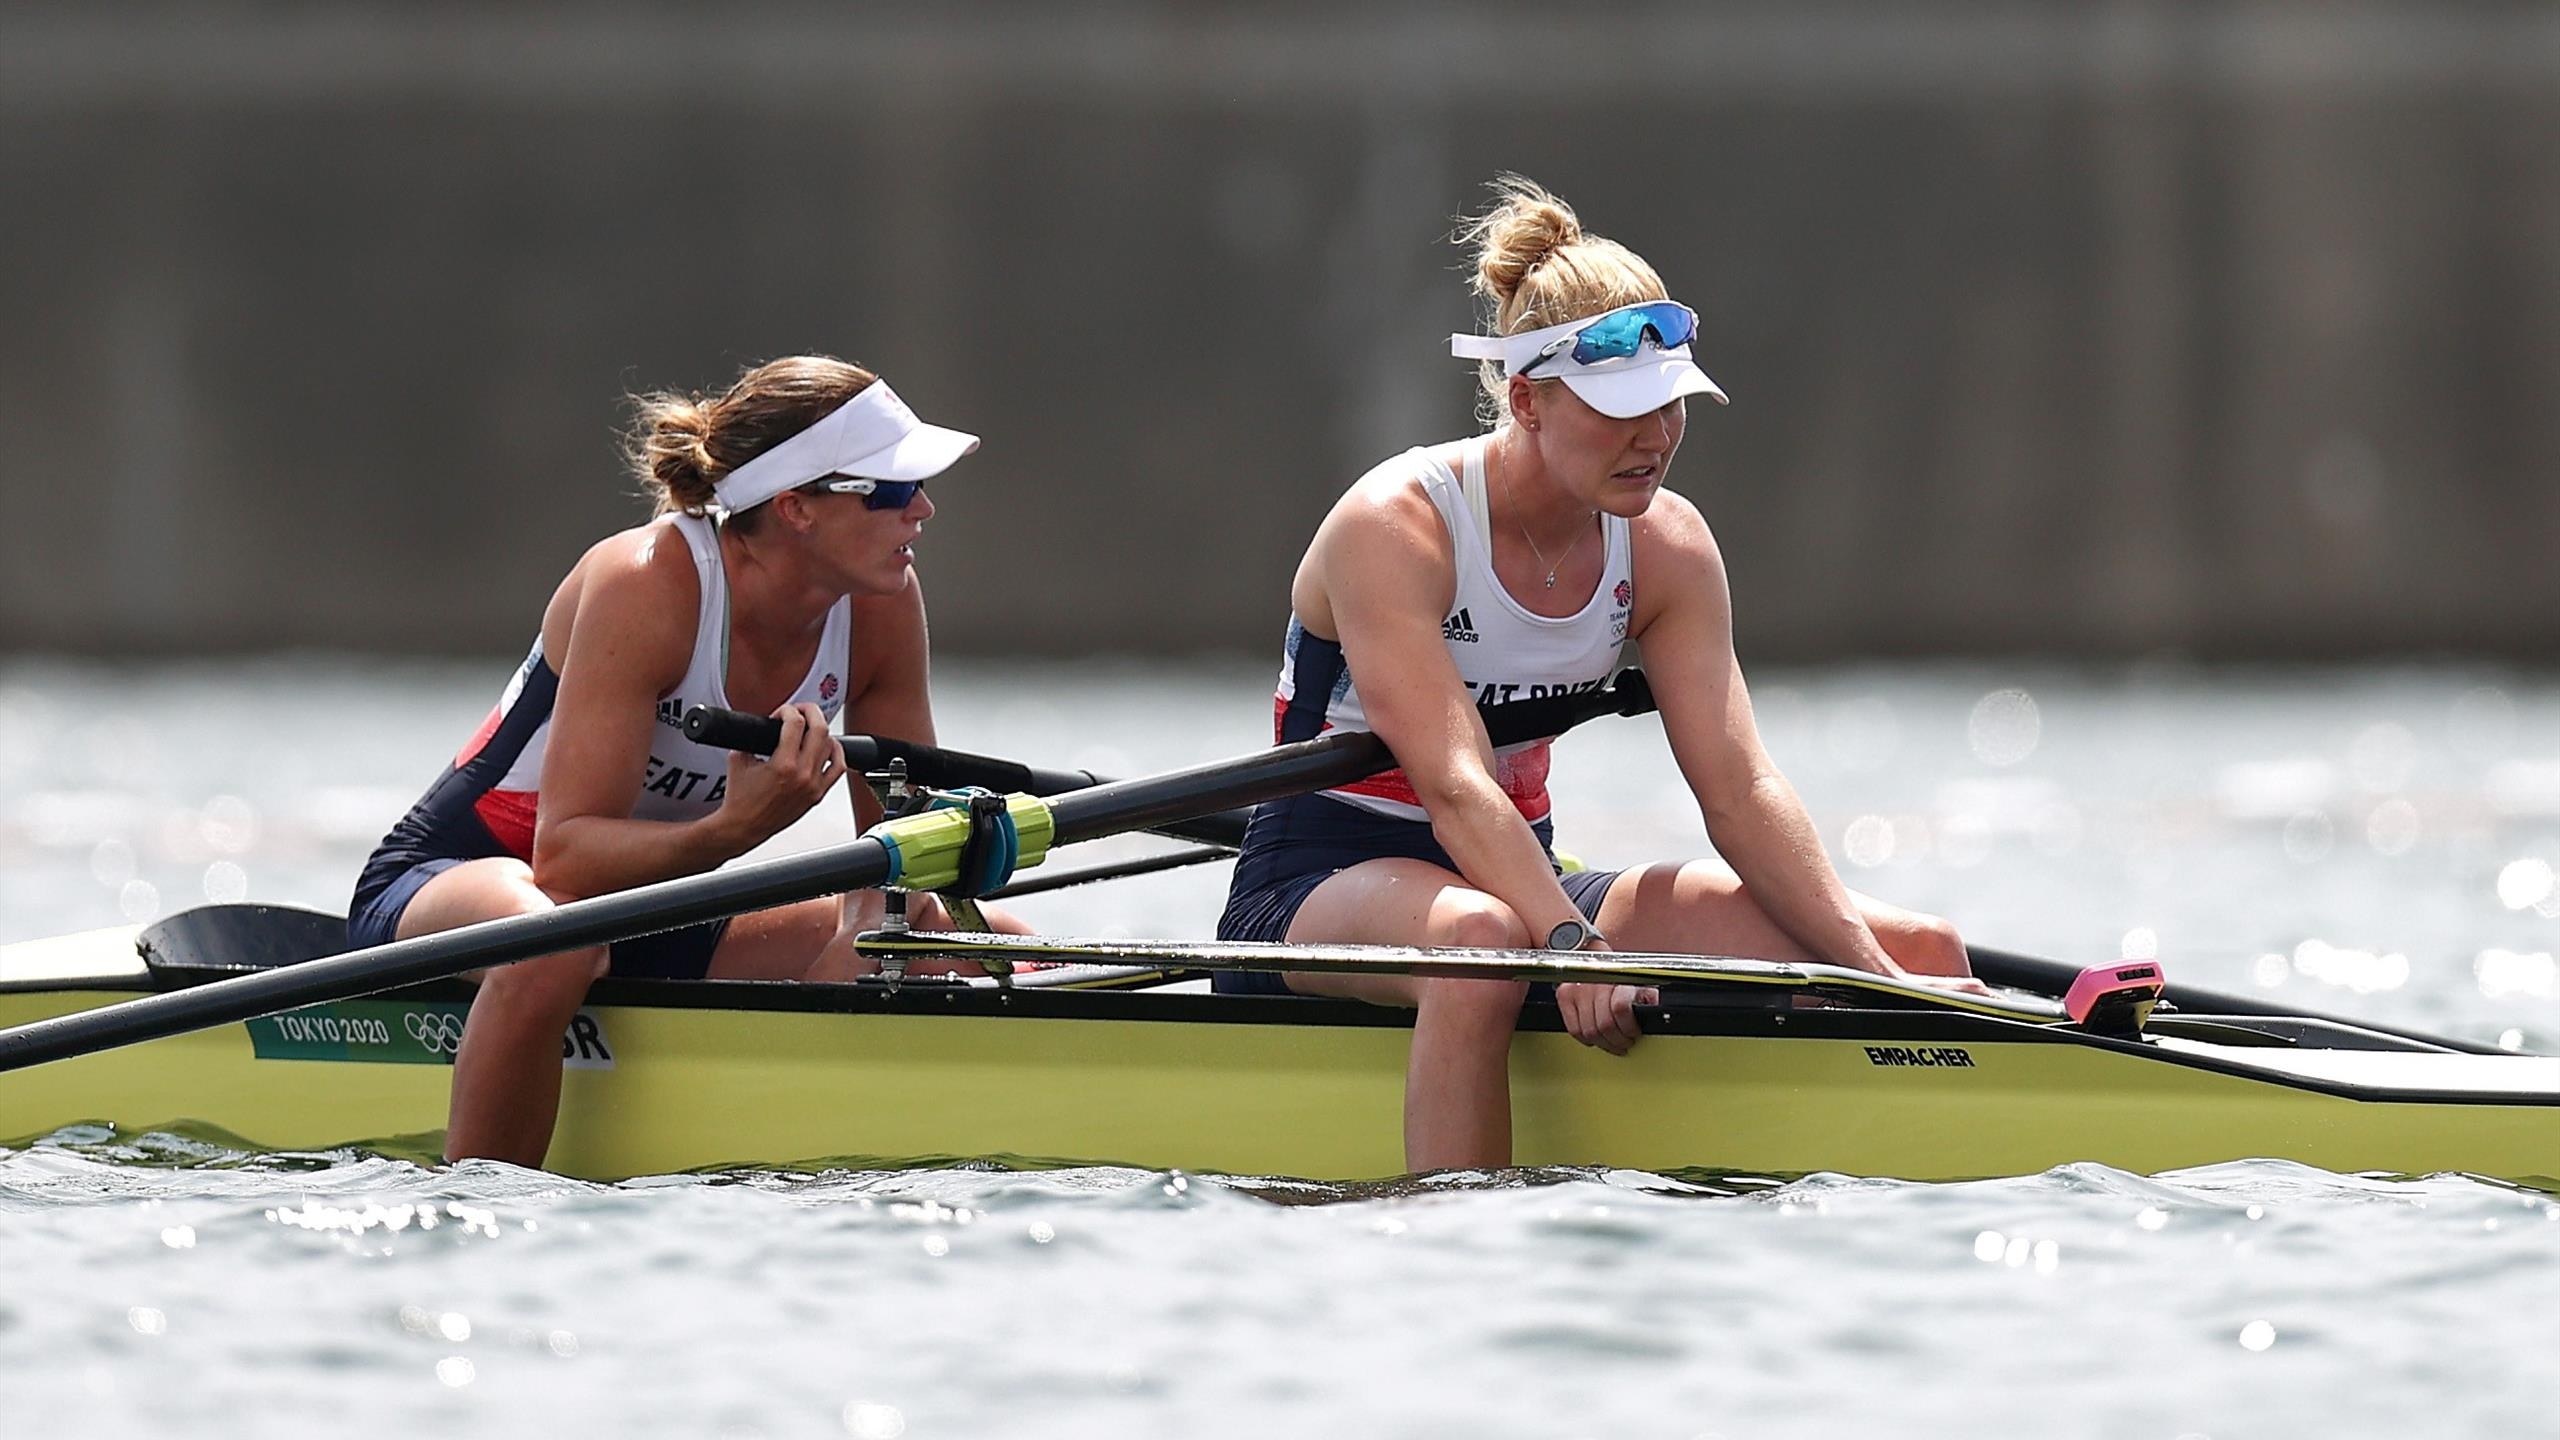 Rowing: Helen Glover and Polly Swann, The Tokyo 2020 Summer Olympians who took fourth place. 2560x1440 HD Wallpaper.